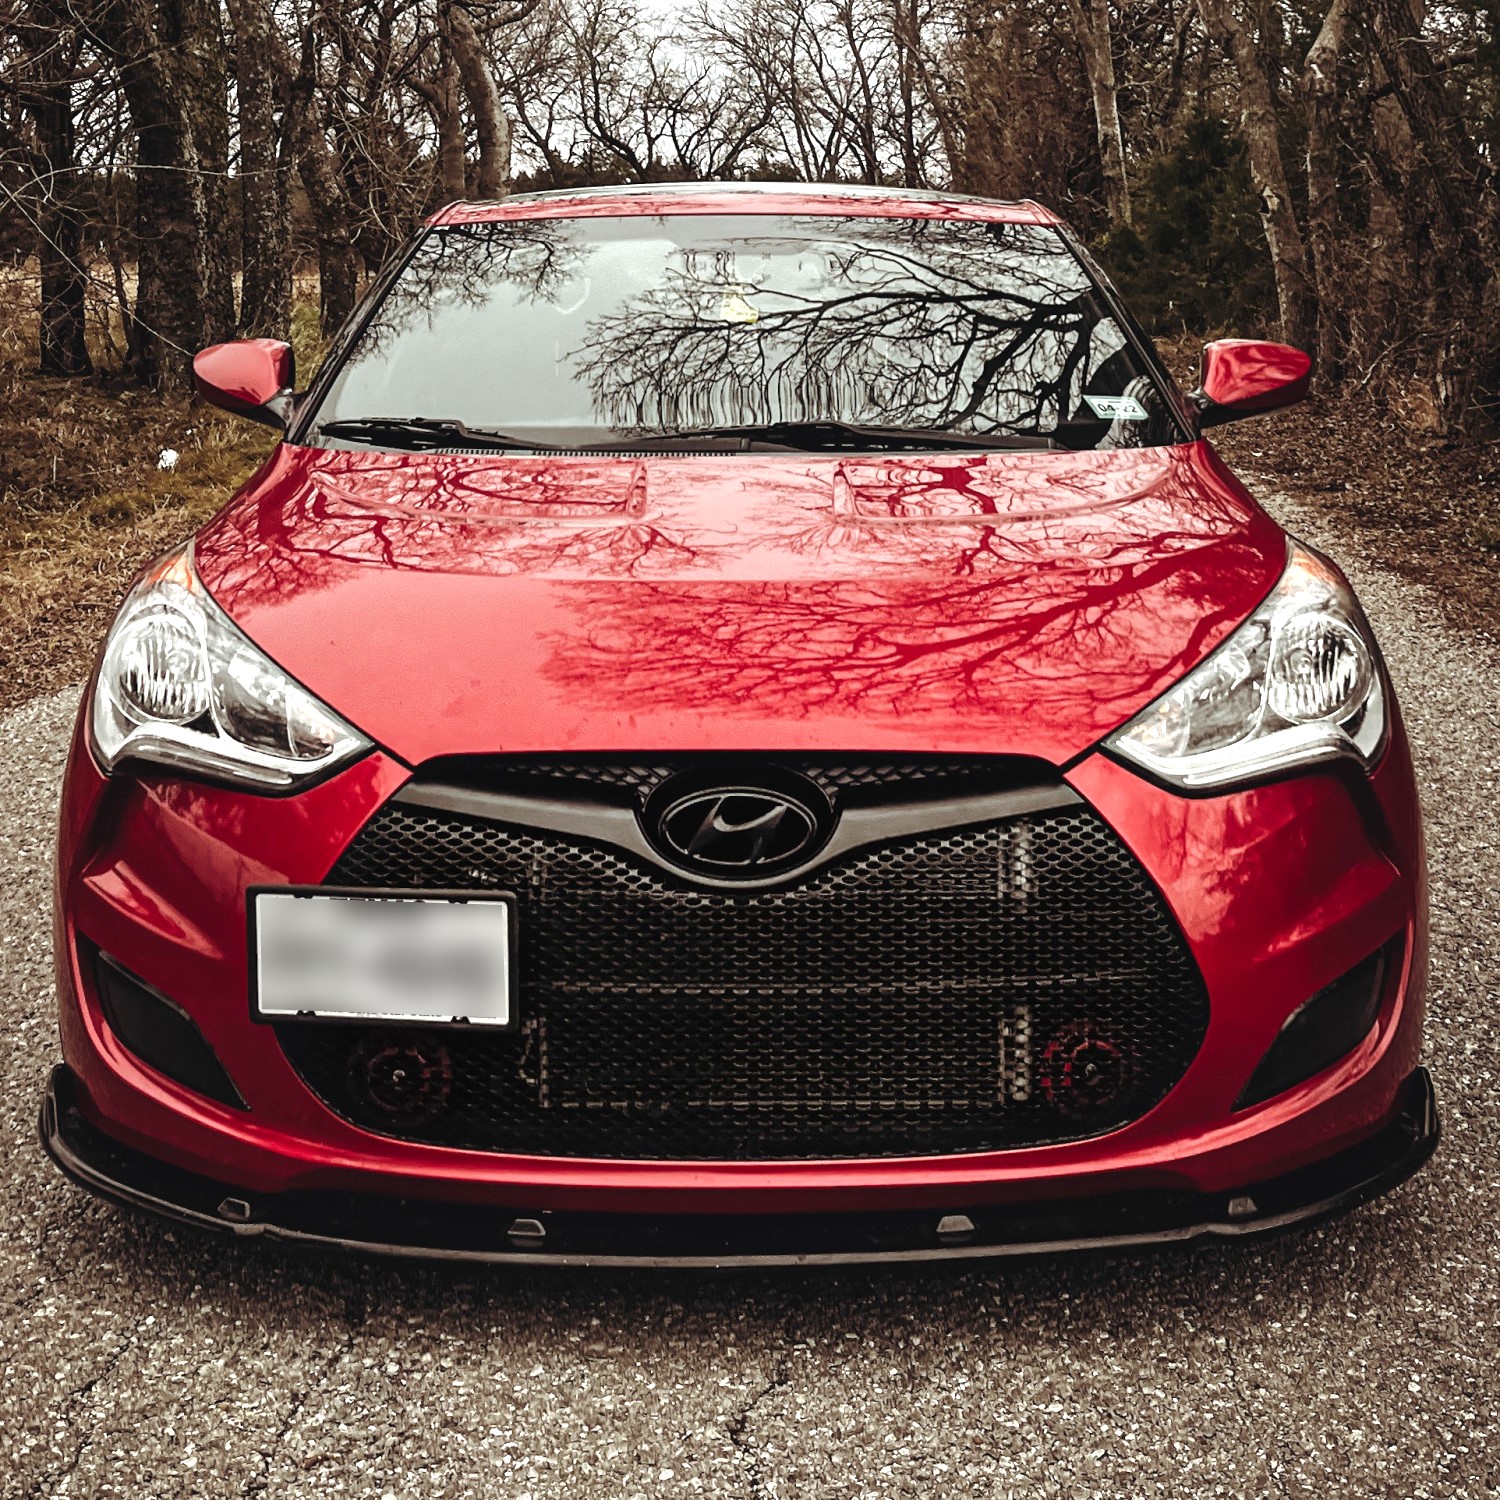 Non-Turbo Veloster Gets a Custom Look with New Grille